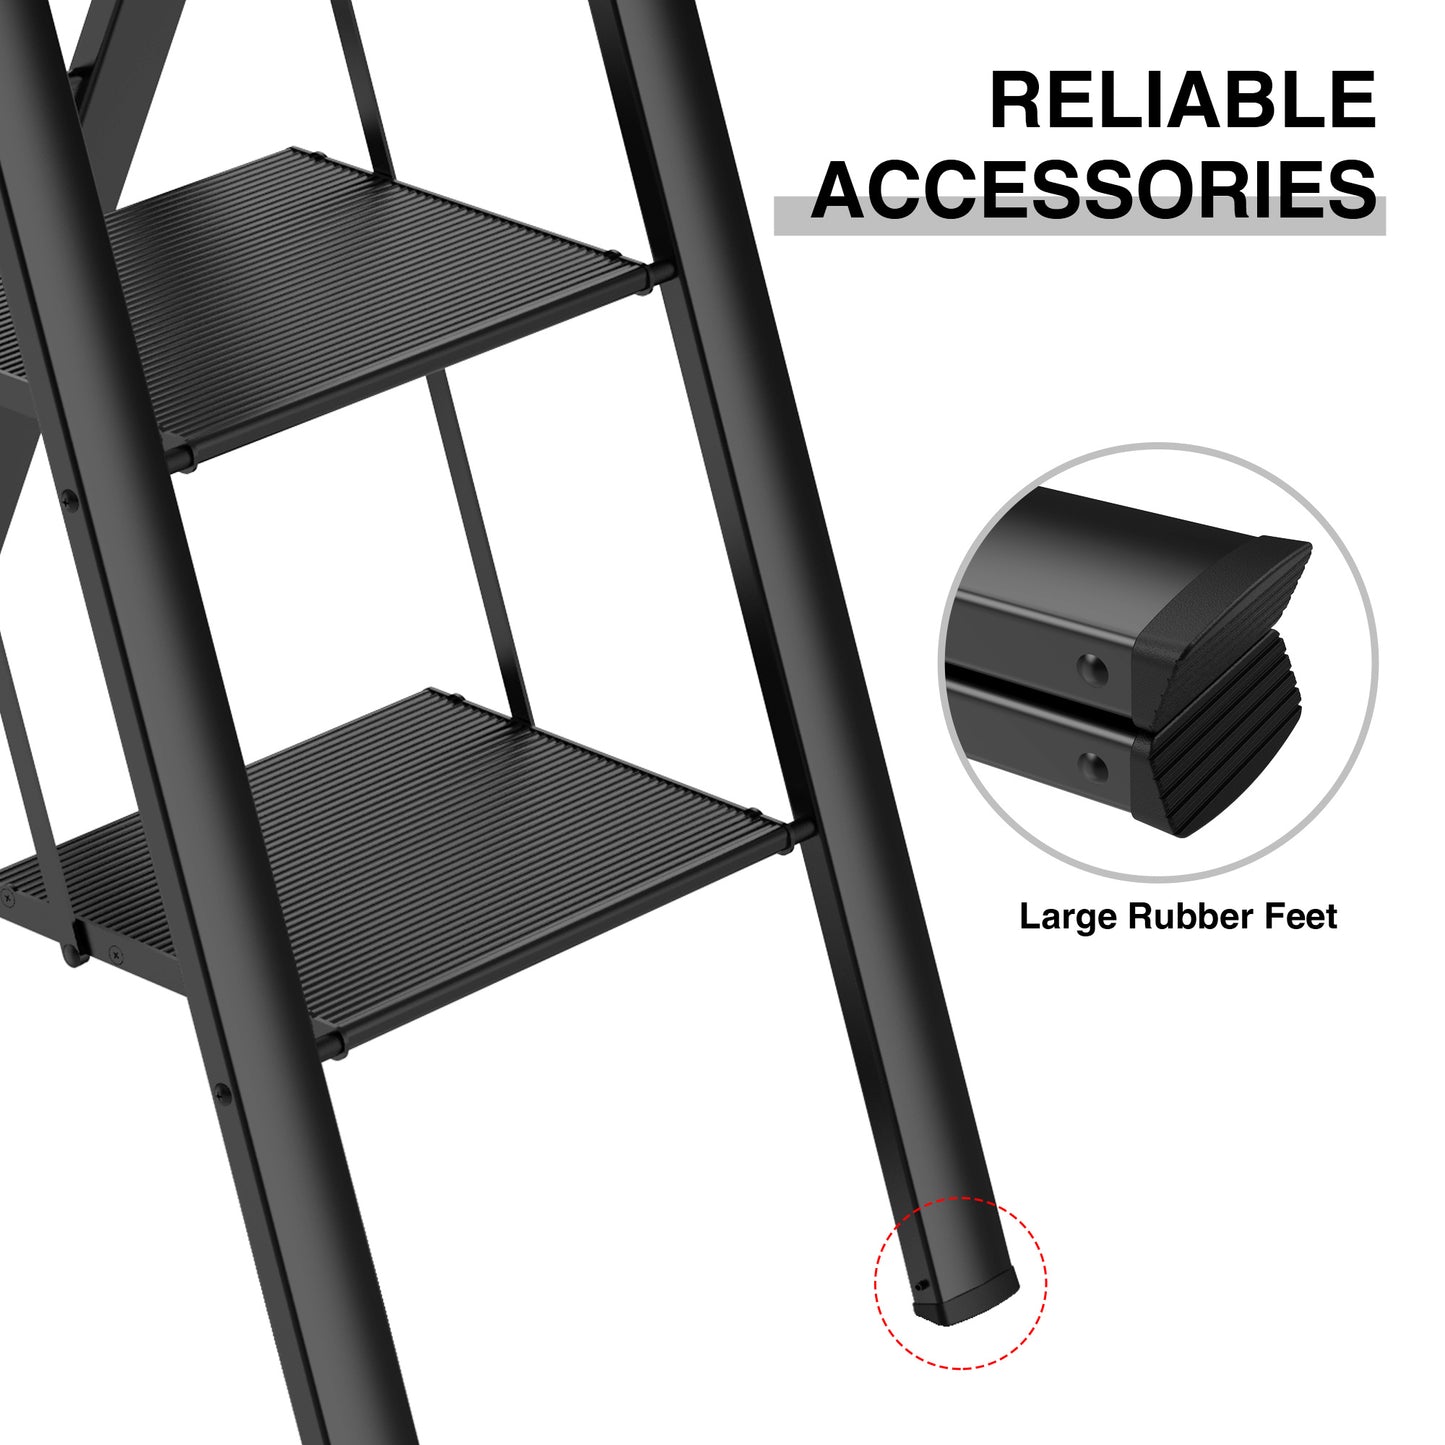 3 Step Ladder;  Retractable Handgrip Folding Step Stool with Anti-Slip Wide Pedal;  Aluminum Stool Ladders 3 Steps;  300lbs Safety Household Ladder